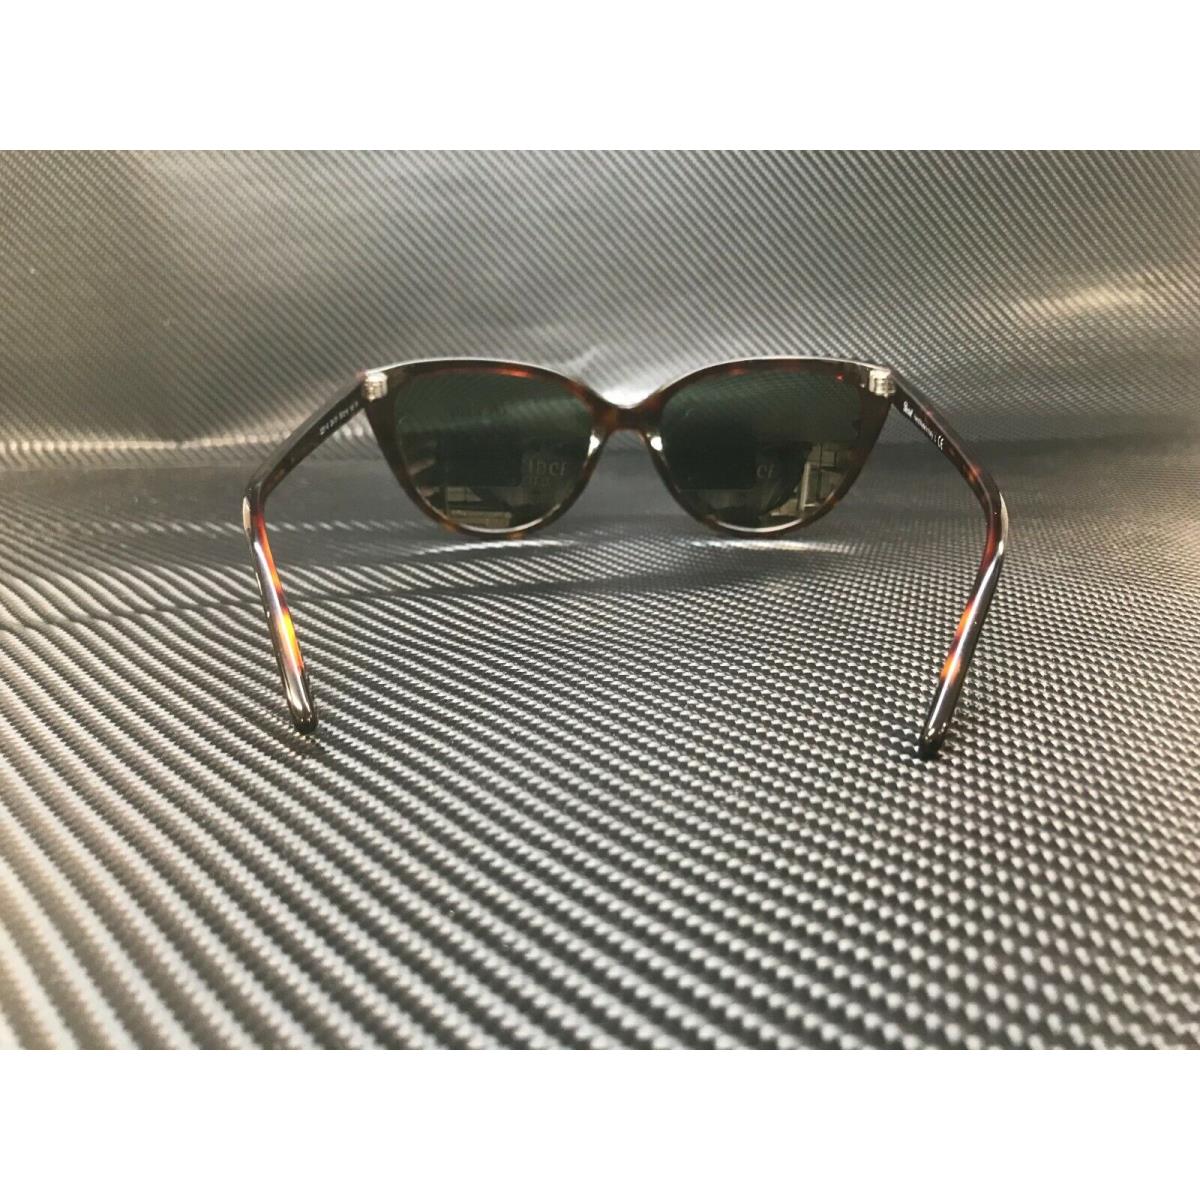 Persol sunglasses  - Brown Frame 2